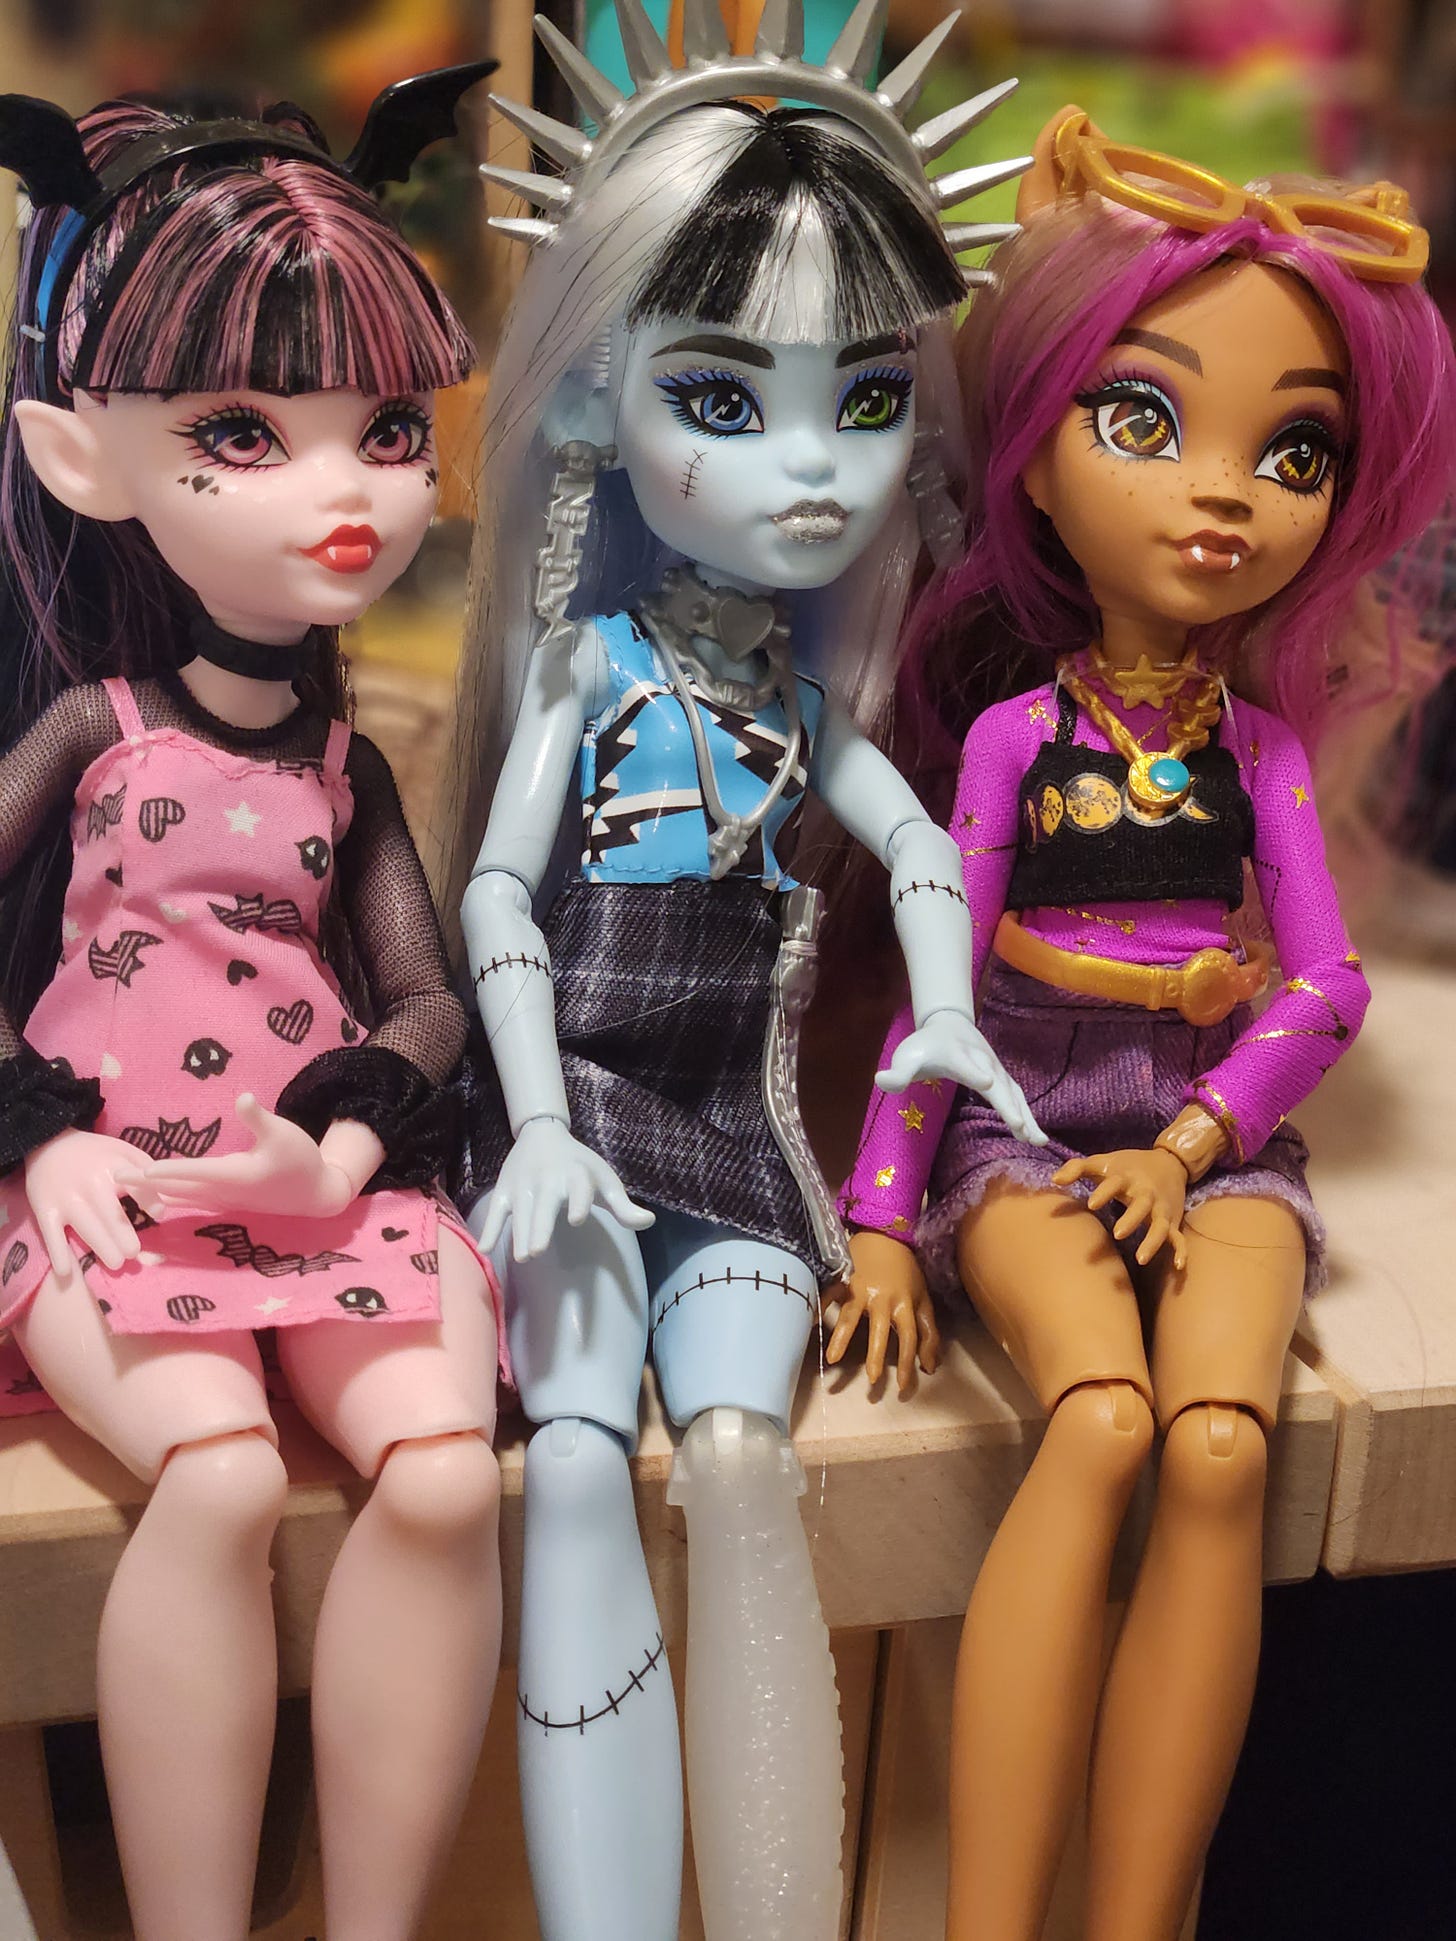 I'm a newer collector, so I'm still learning all the proper terms, but pictured are generation 3 Draculaura, Frankie Stein, and Clawdeen Wolf.